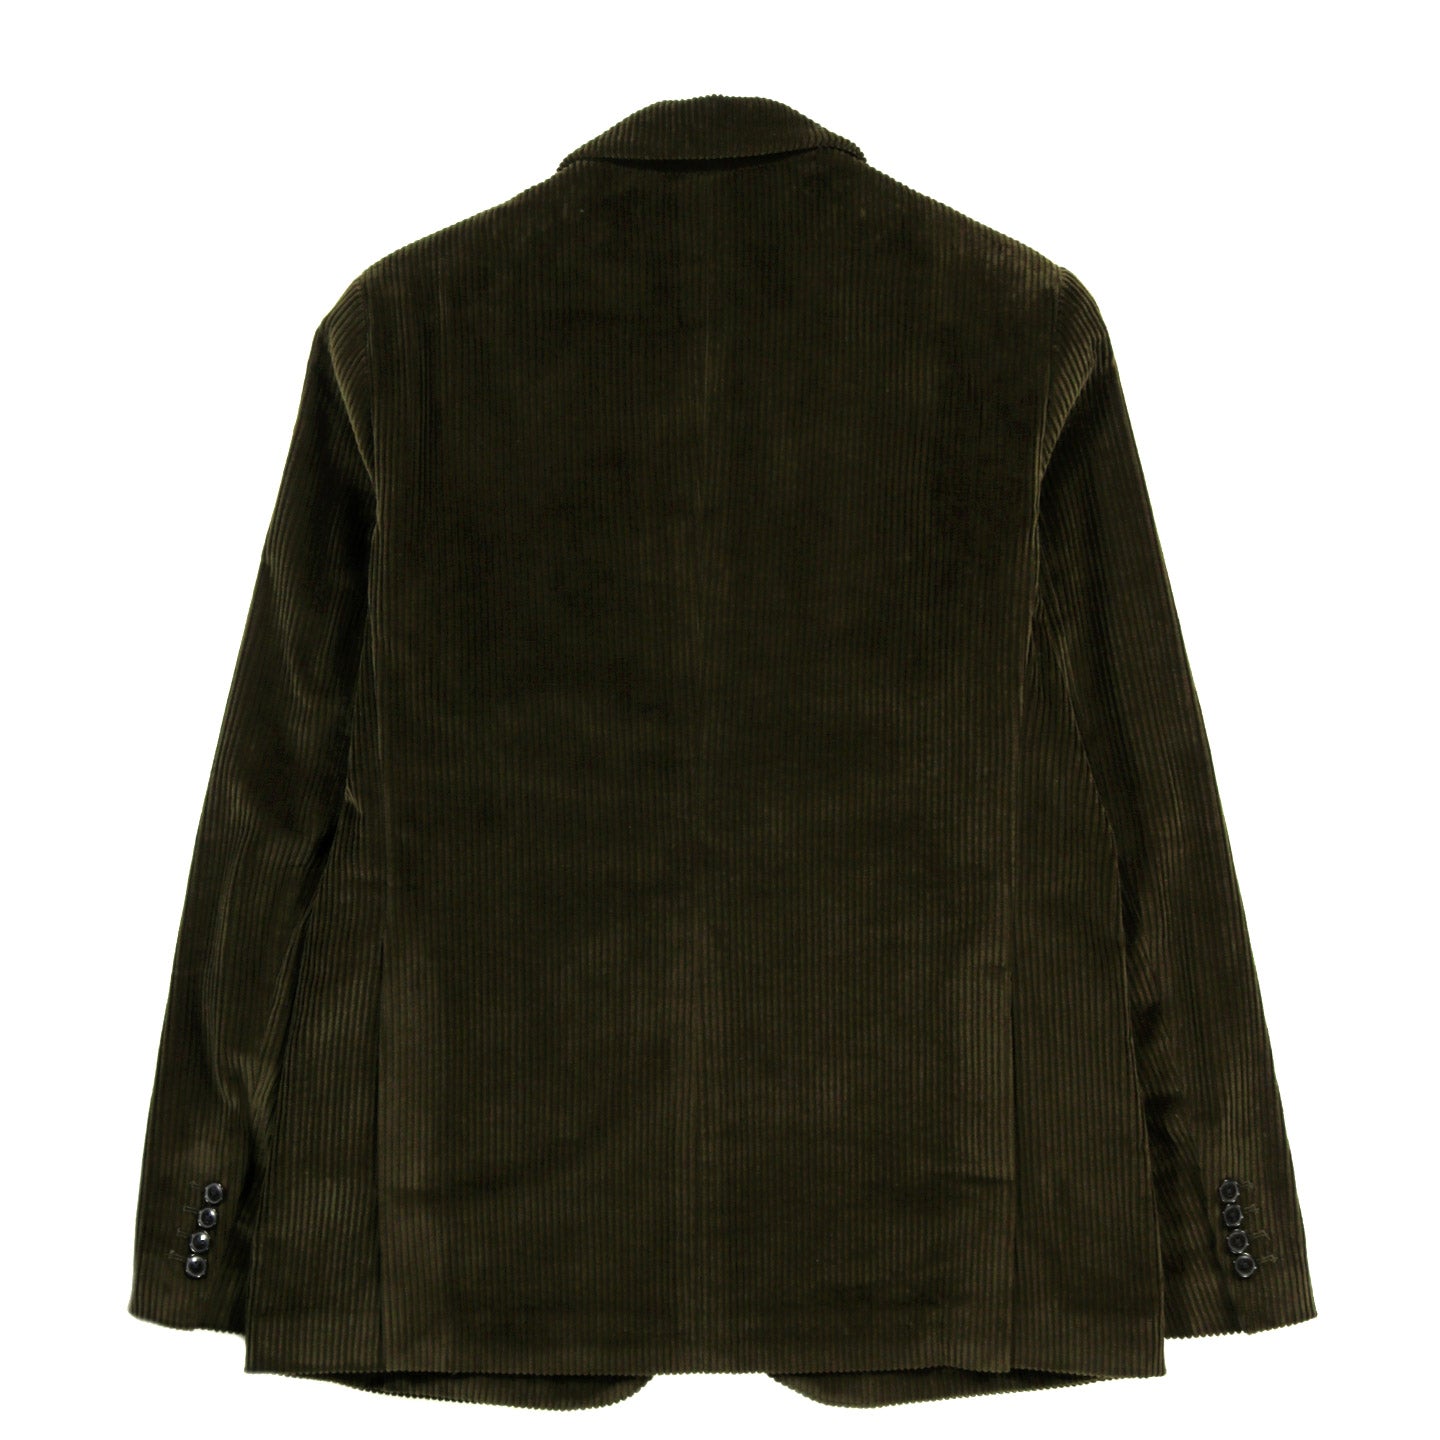 A KIND OF GUISE RELAXED NOTCH BLAZER OLIVE CORDUROY